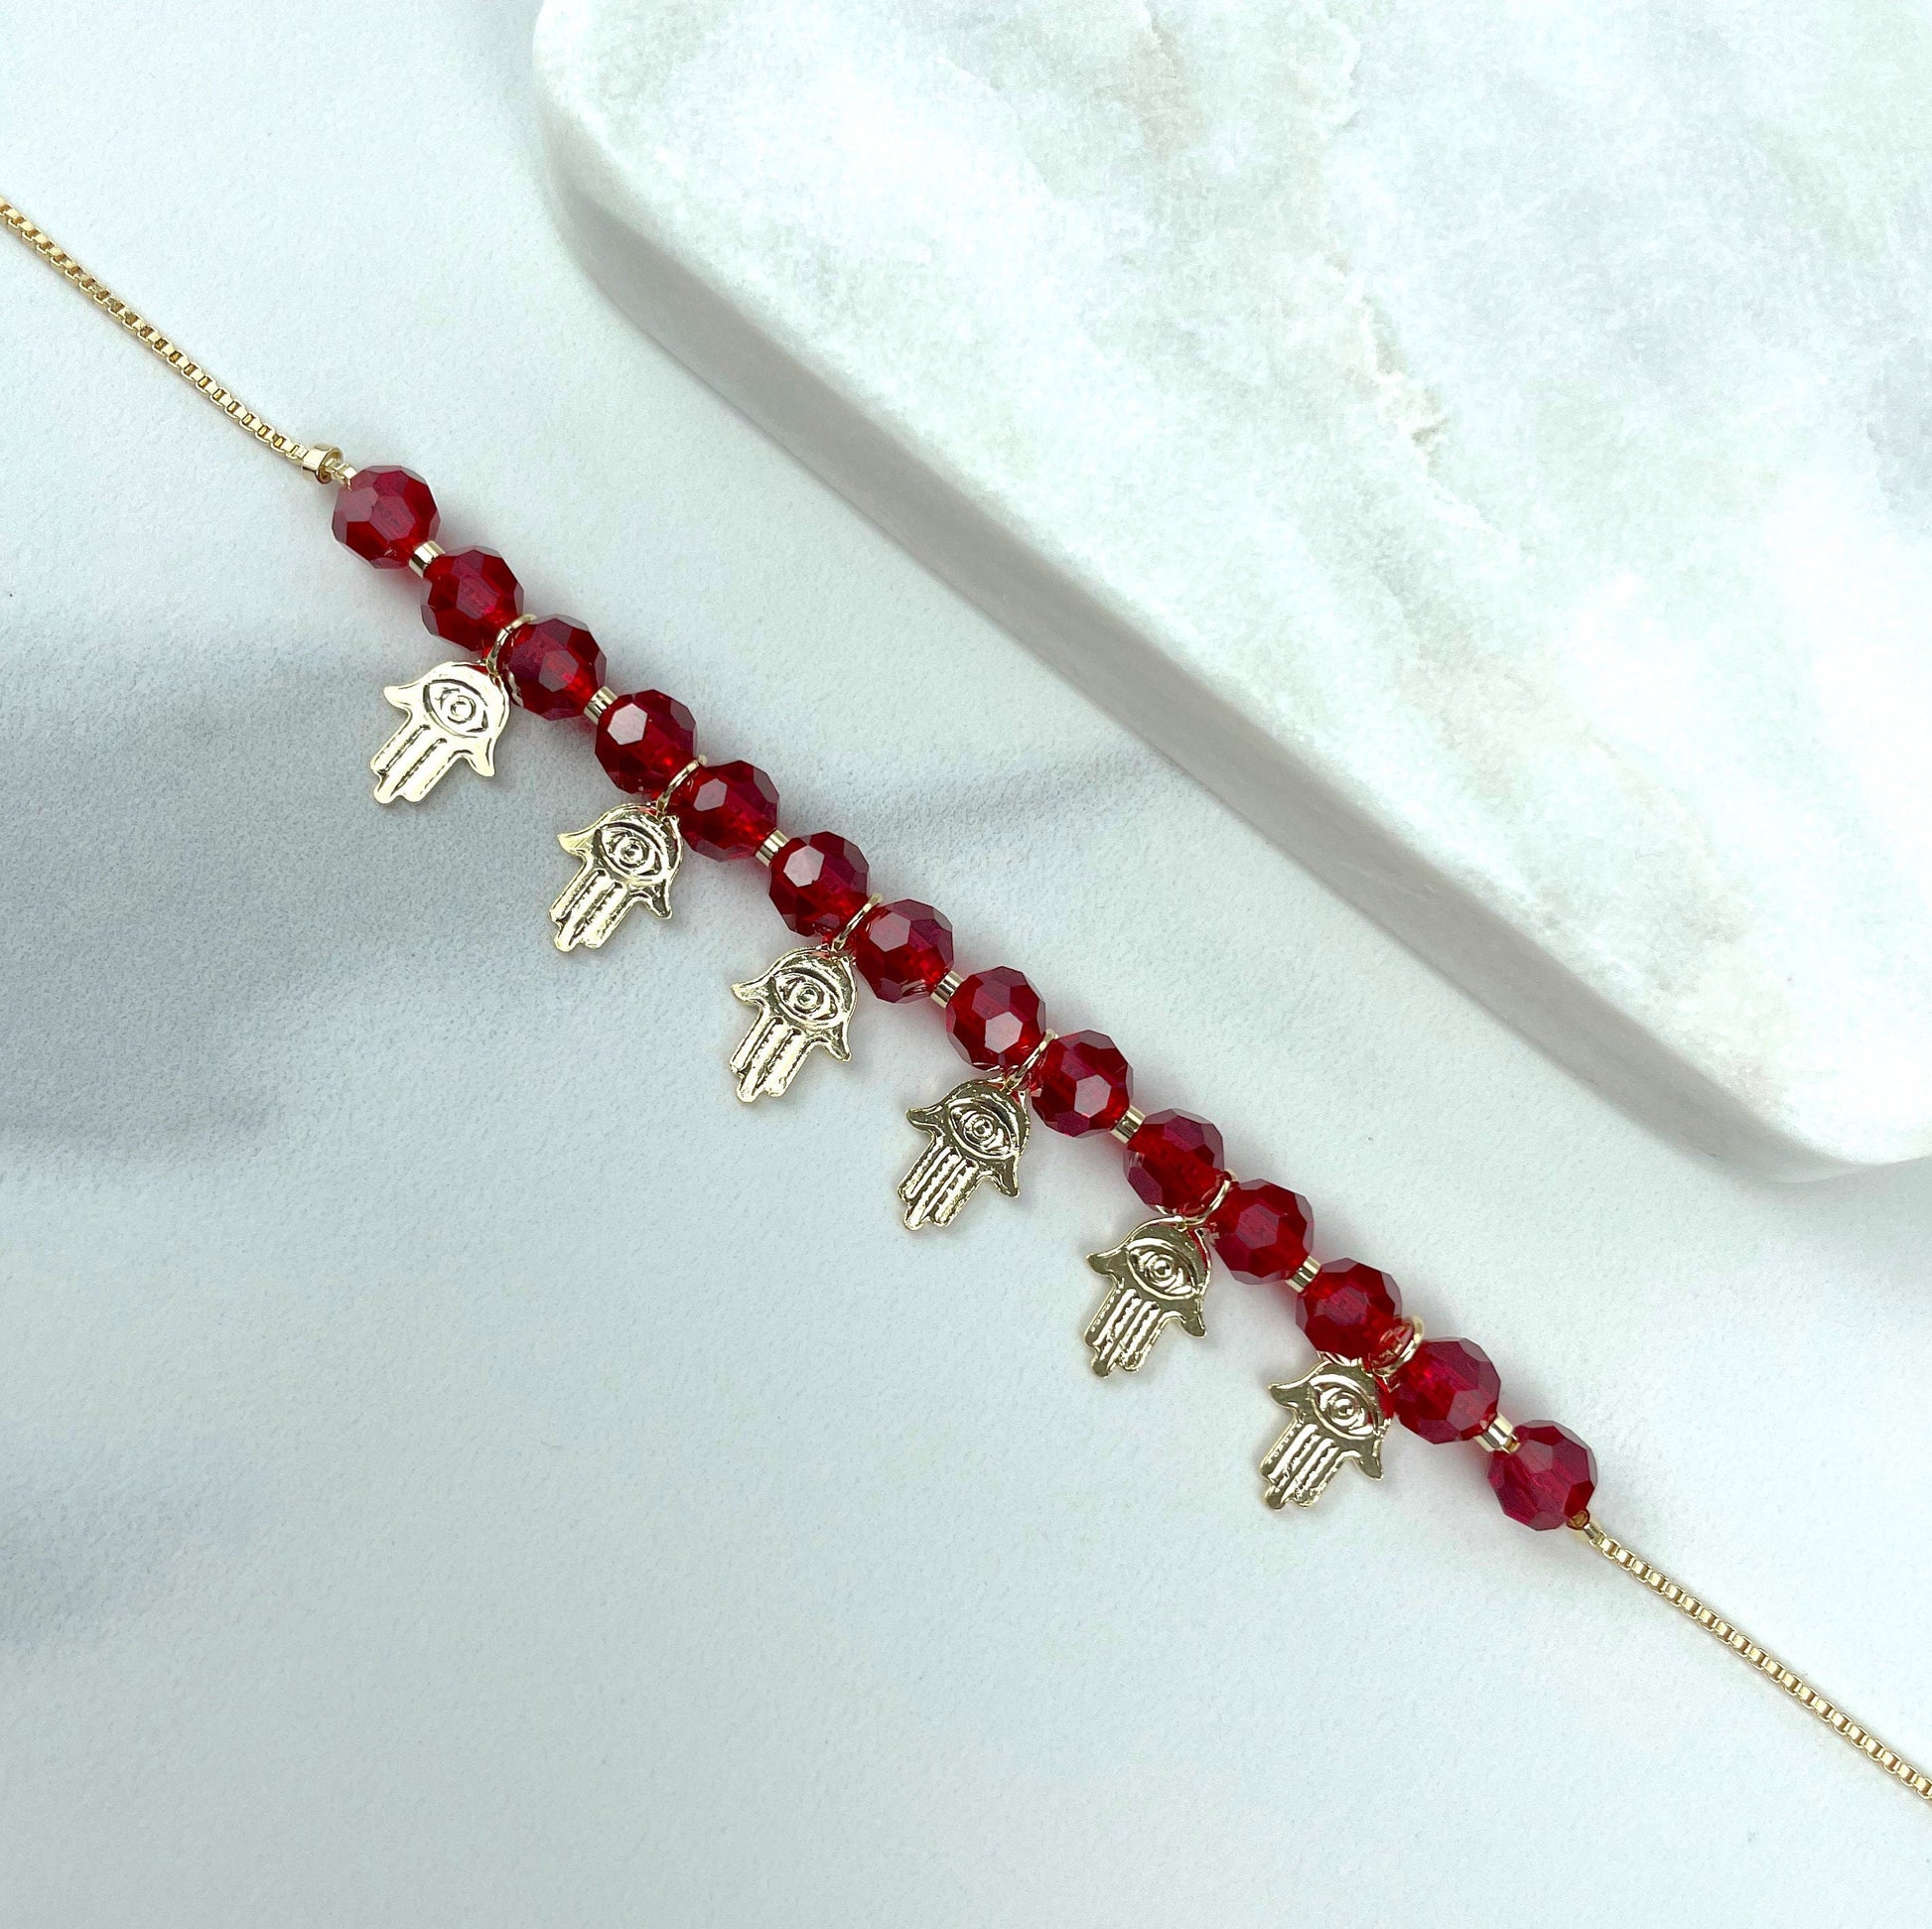 18k Gold Filled 1mm Box Chain, Red Beads, Hamsa Hand Charms Bracelet, Lucky & Protection, Wholesale Jewelry Making Supplies